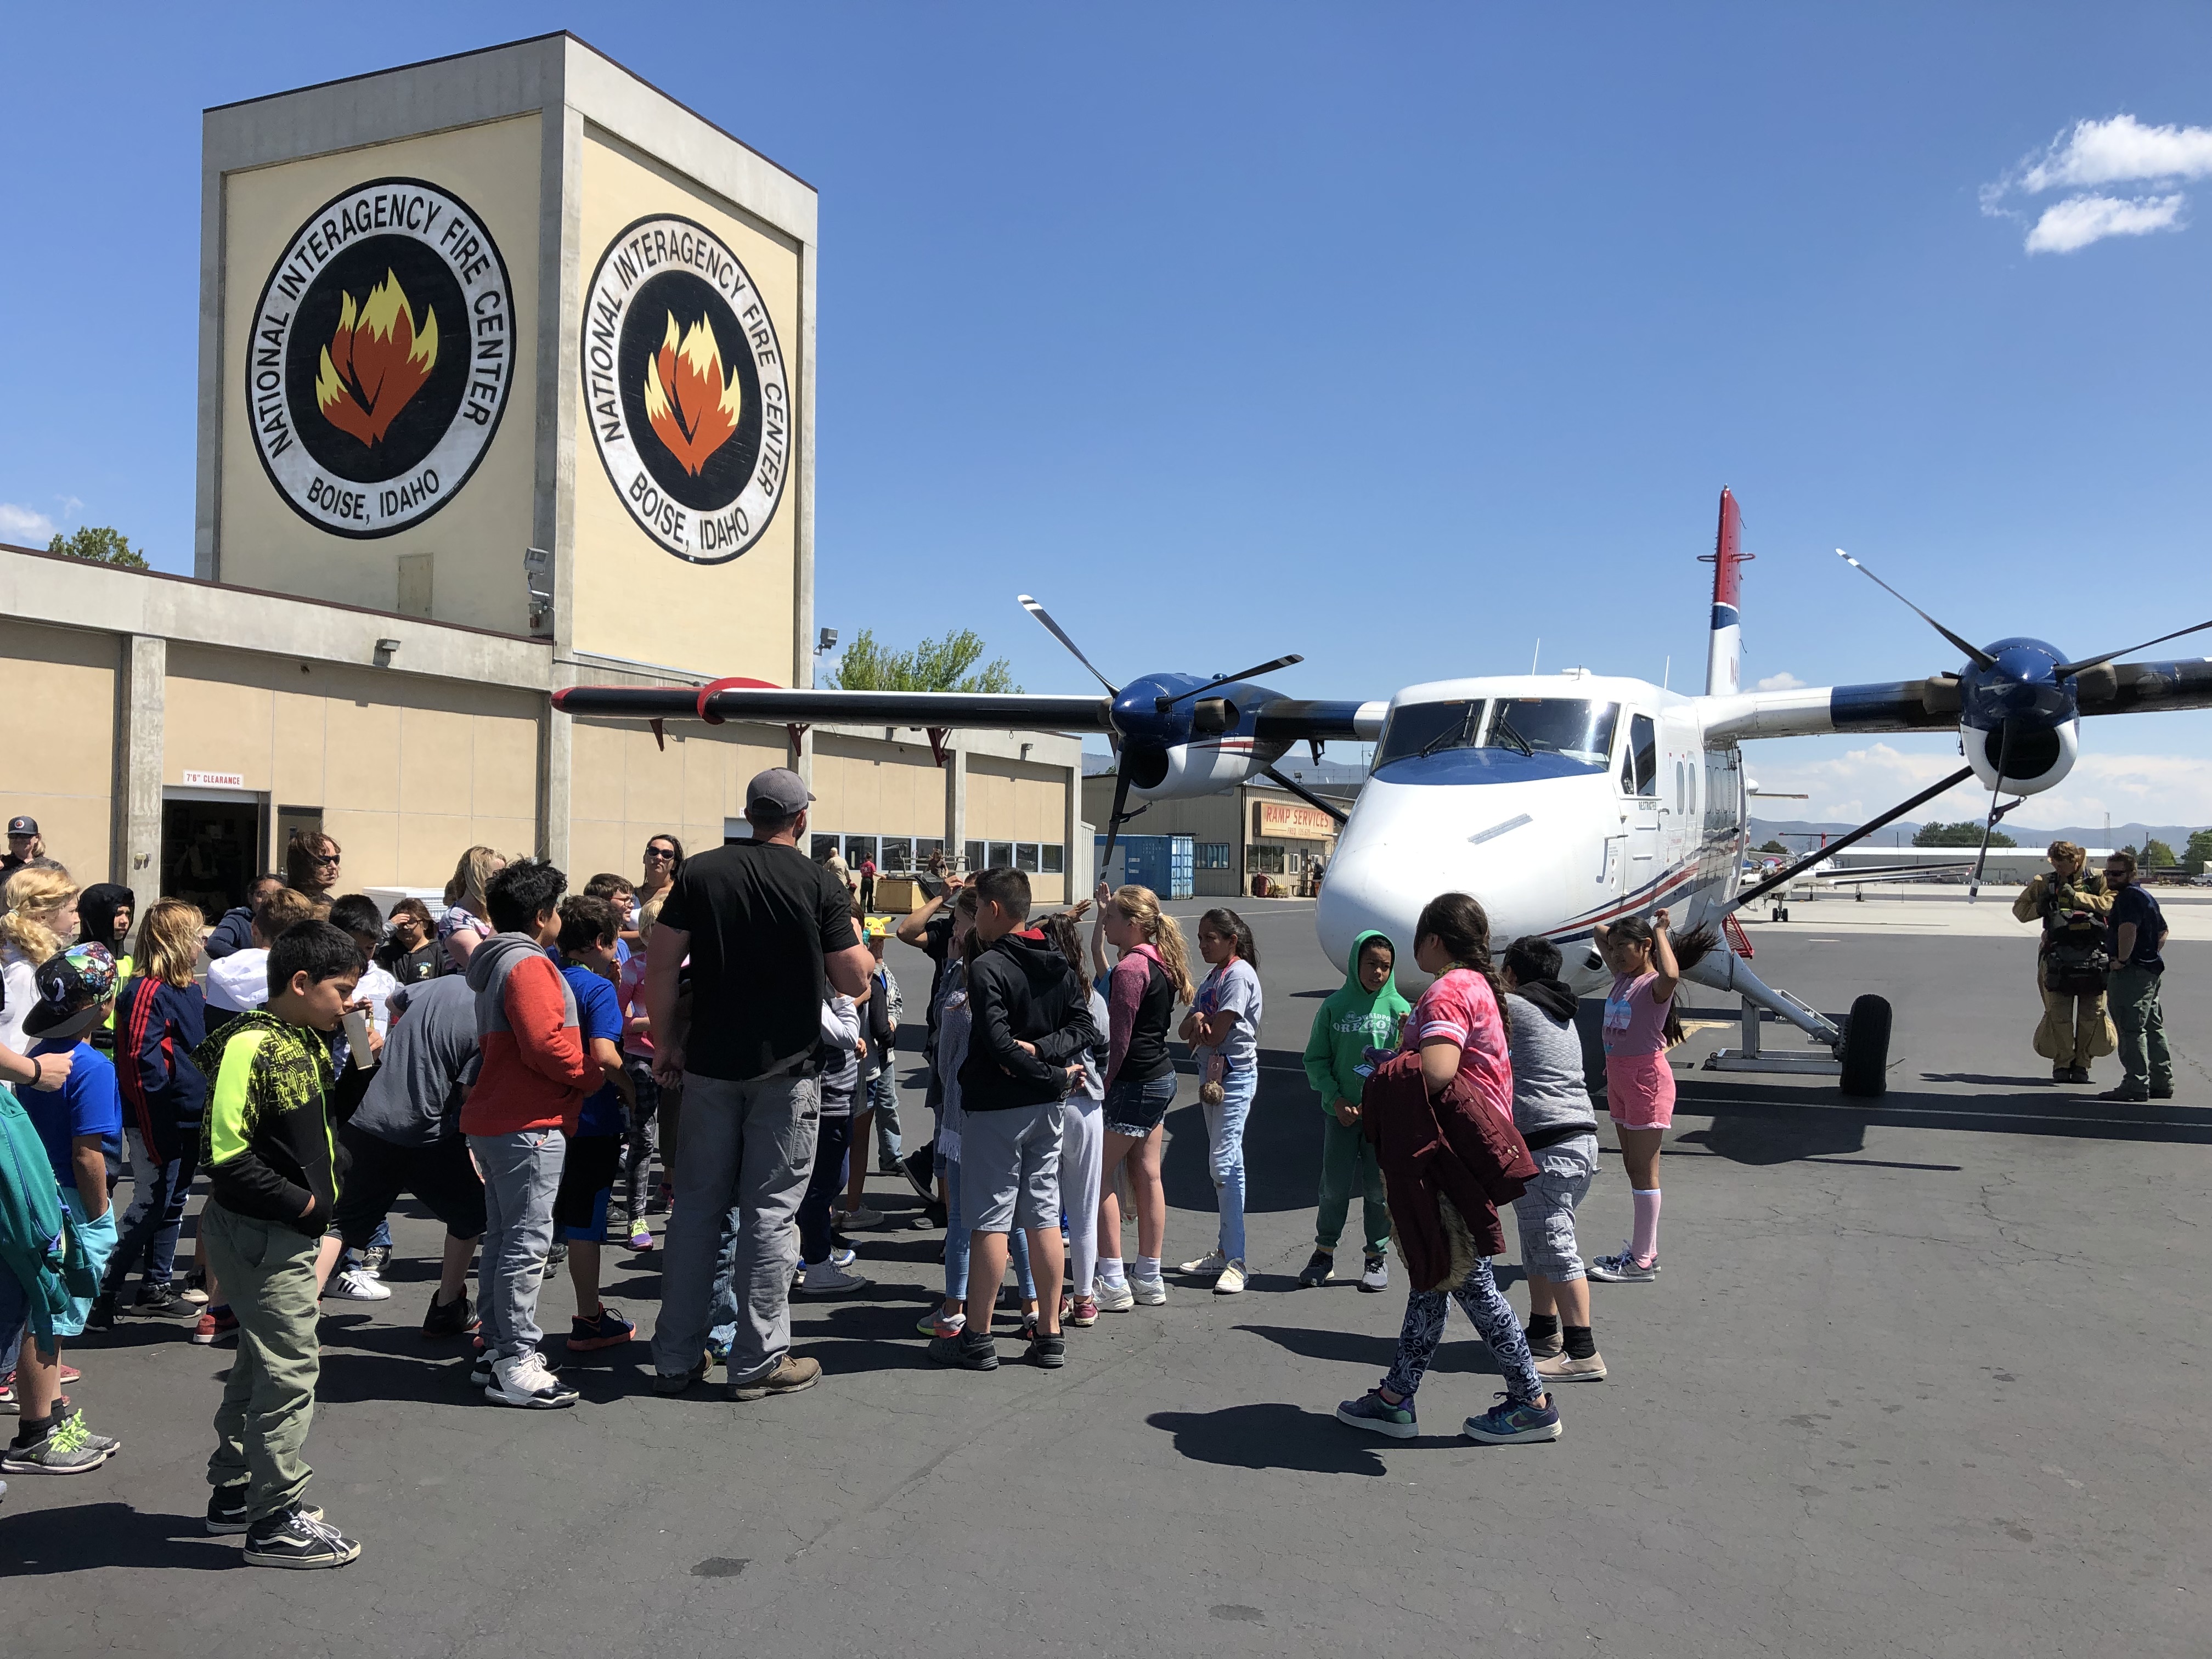 Students from Alameda school visit the smokejumpers at the National Interagency Fire Center in Boise, Idaho. Photo by BLM